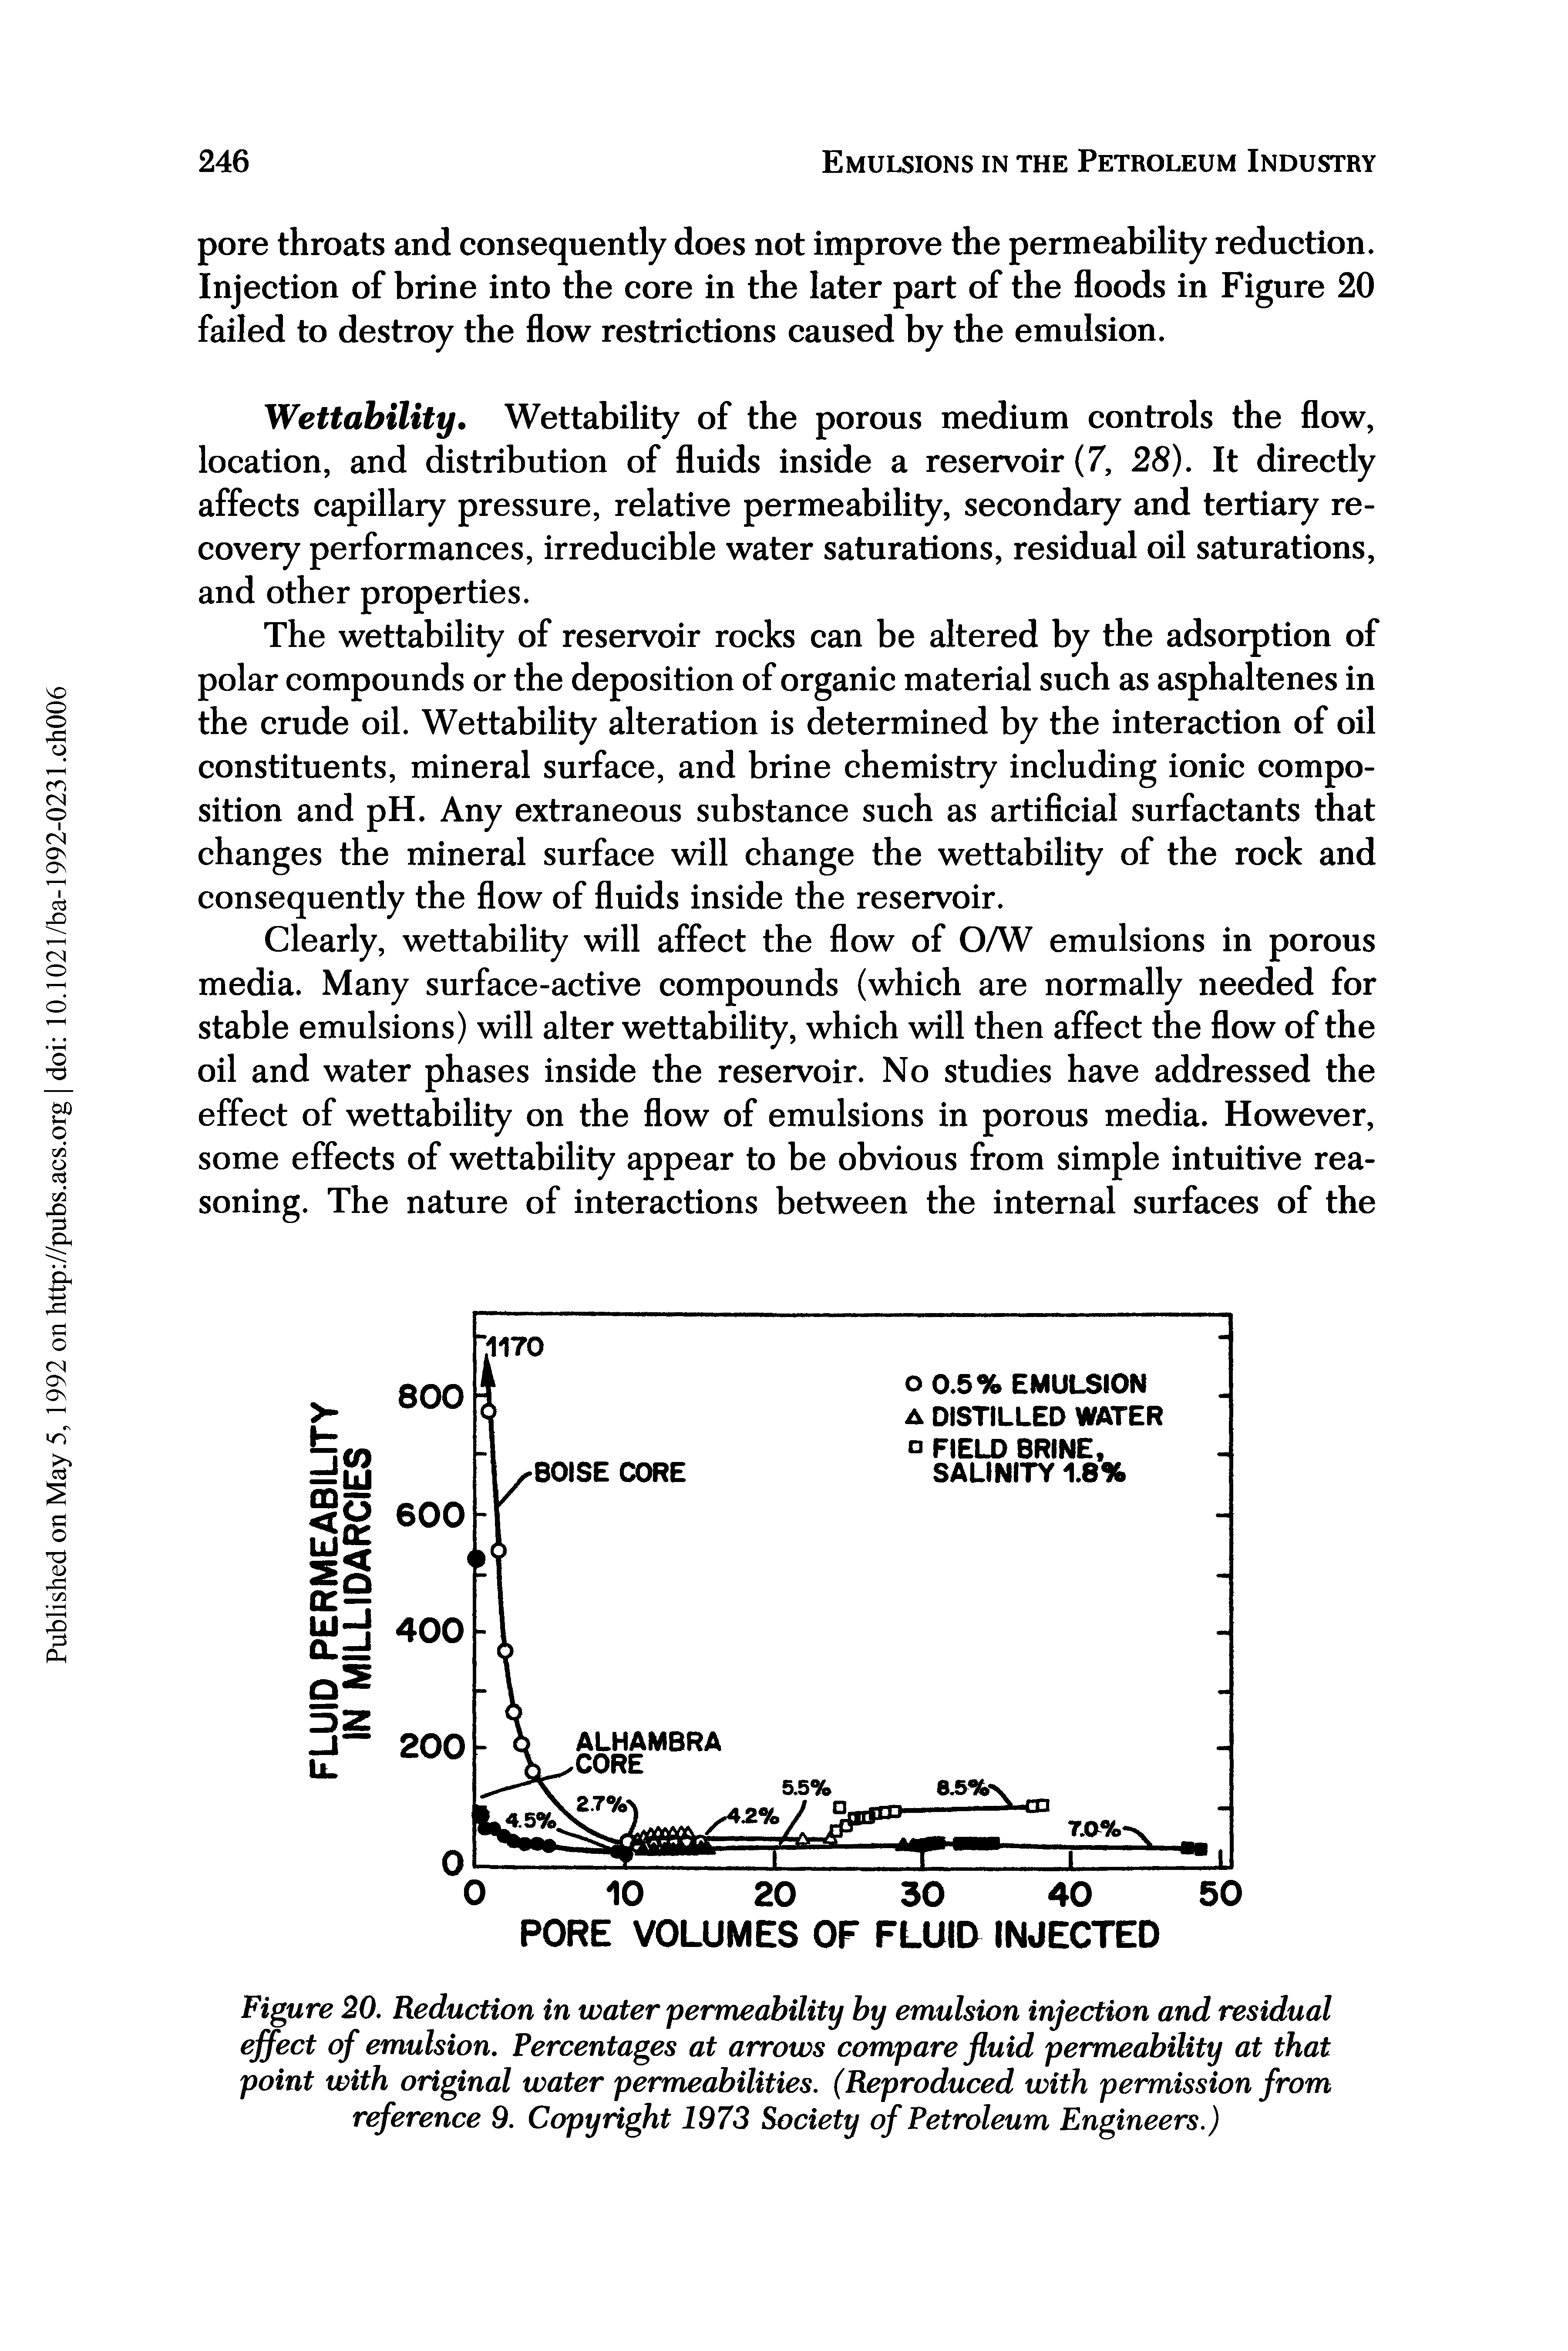 Figure 20. Reduction in water permeability by emulsion injection and residual effect of emulsion. Percentages at arrows compare fluid permeability at that point with original water permeabilities. (Reproduced with permission from reference 9. Copyright 1973 Society of Petroleum Engineers.)...